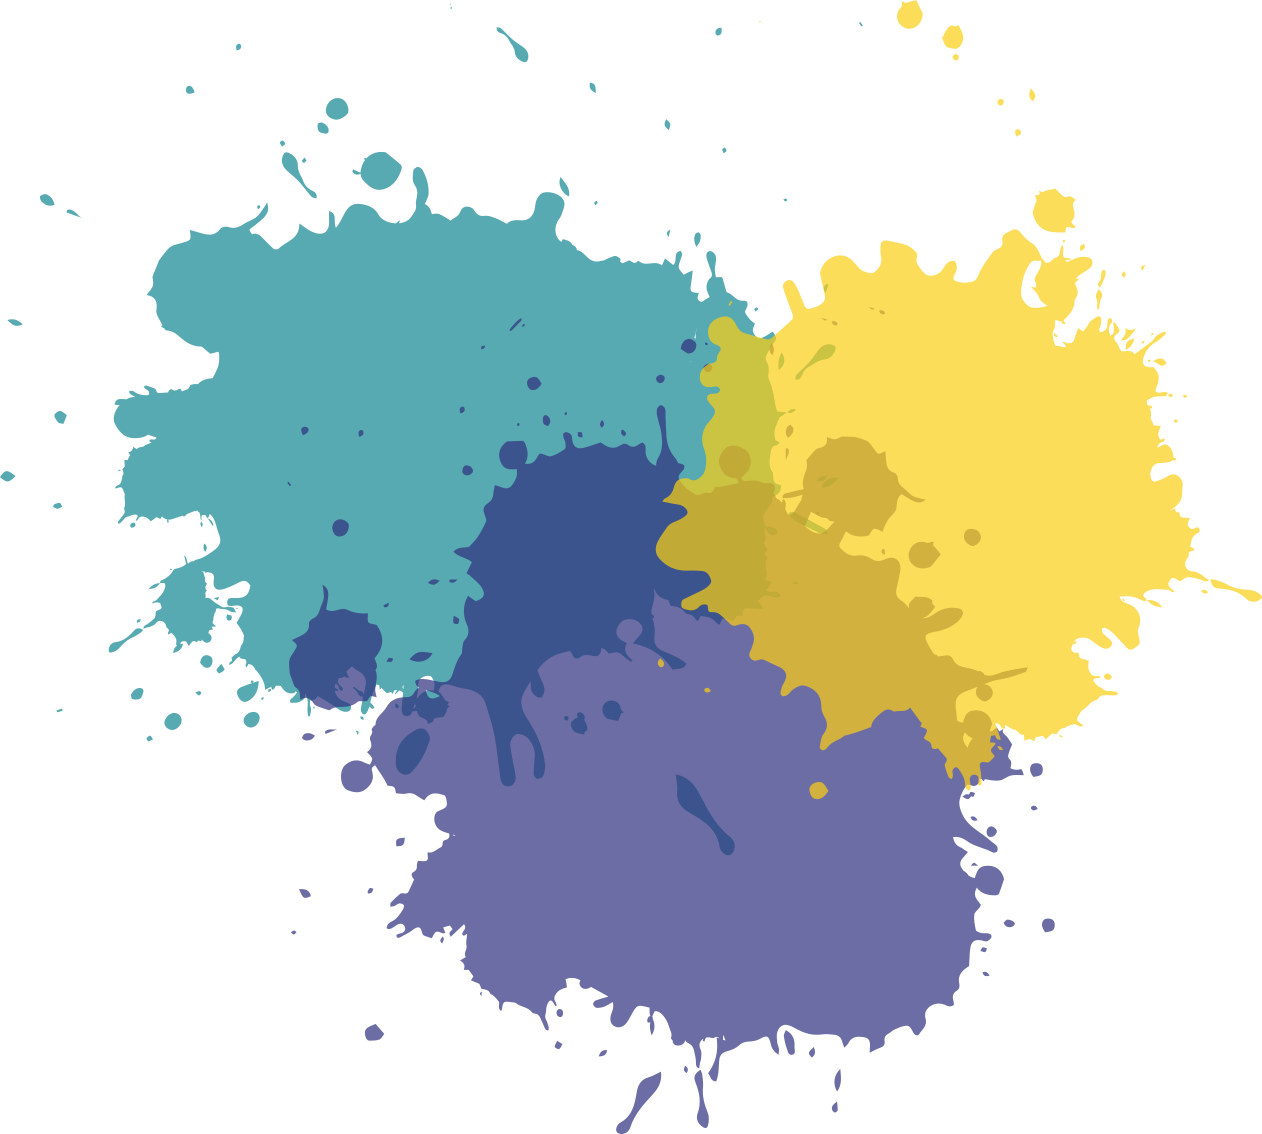 Three splashes of paint overlapping with each other at the centre. One yellow, another blue, and the third one green